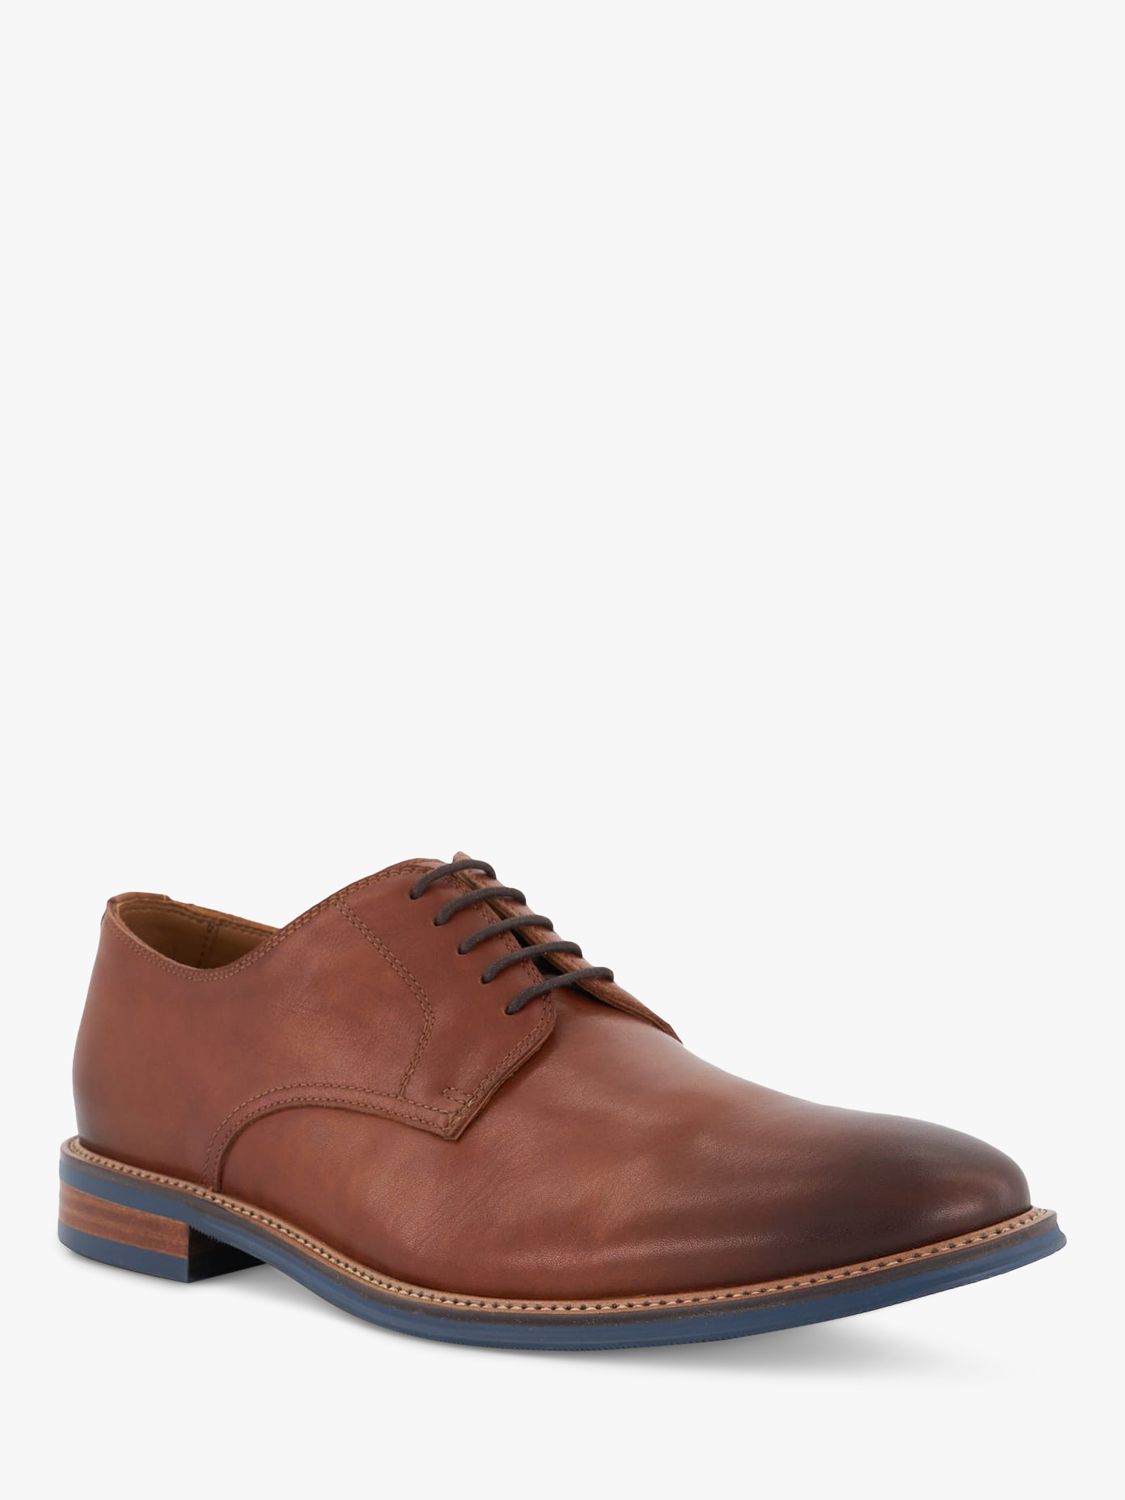 Dune Stanley Leather Derby Shoes, Tan-leather, EU43